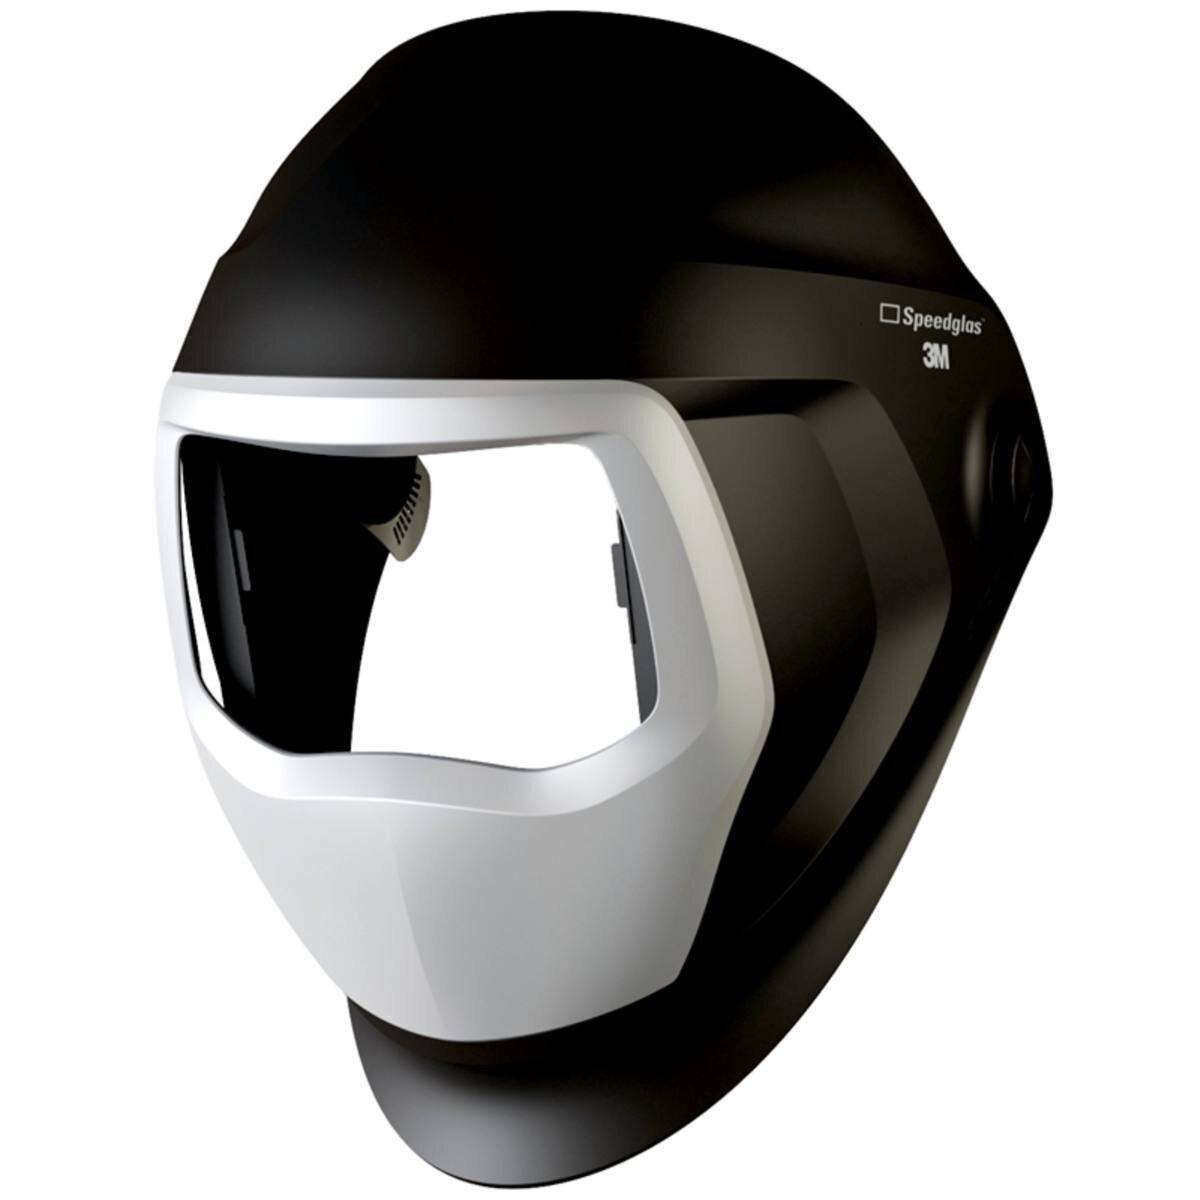 3M Speedglas welding mask 9100 with side window, without headgear, without ADF automatic welding filter #501890